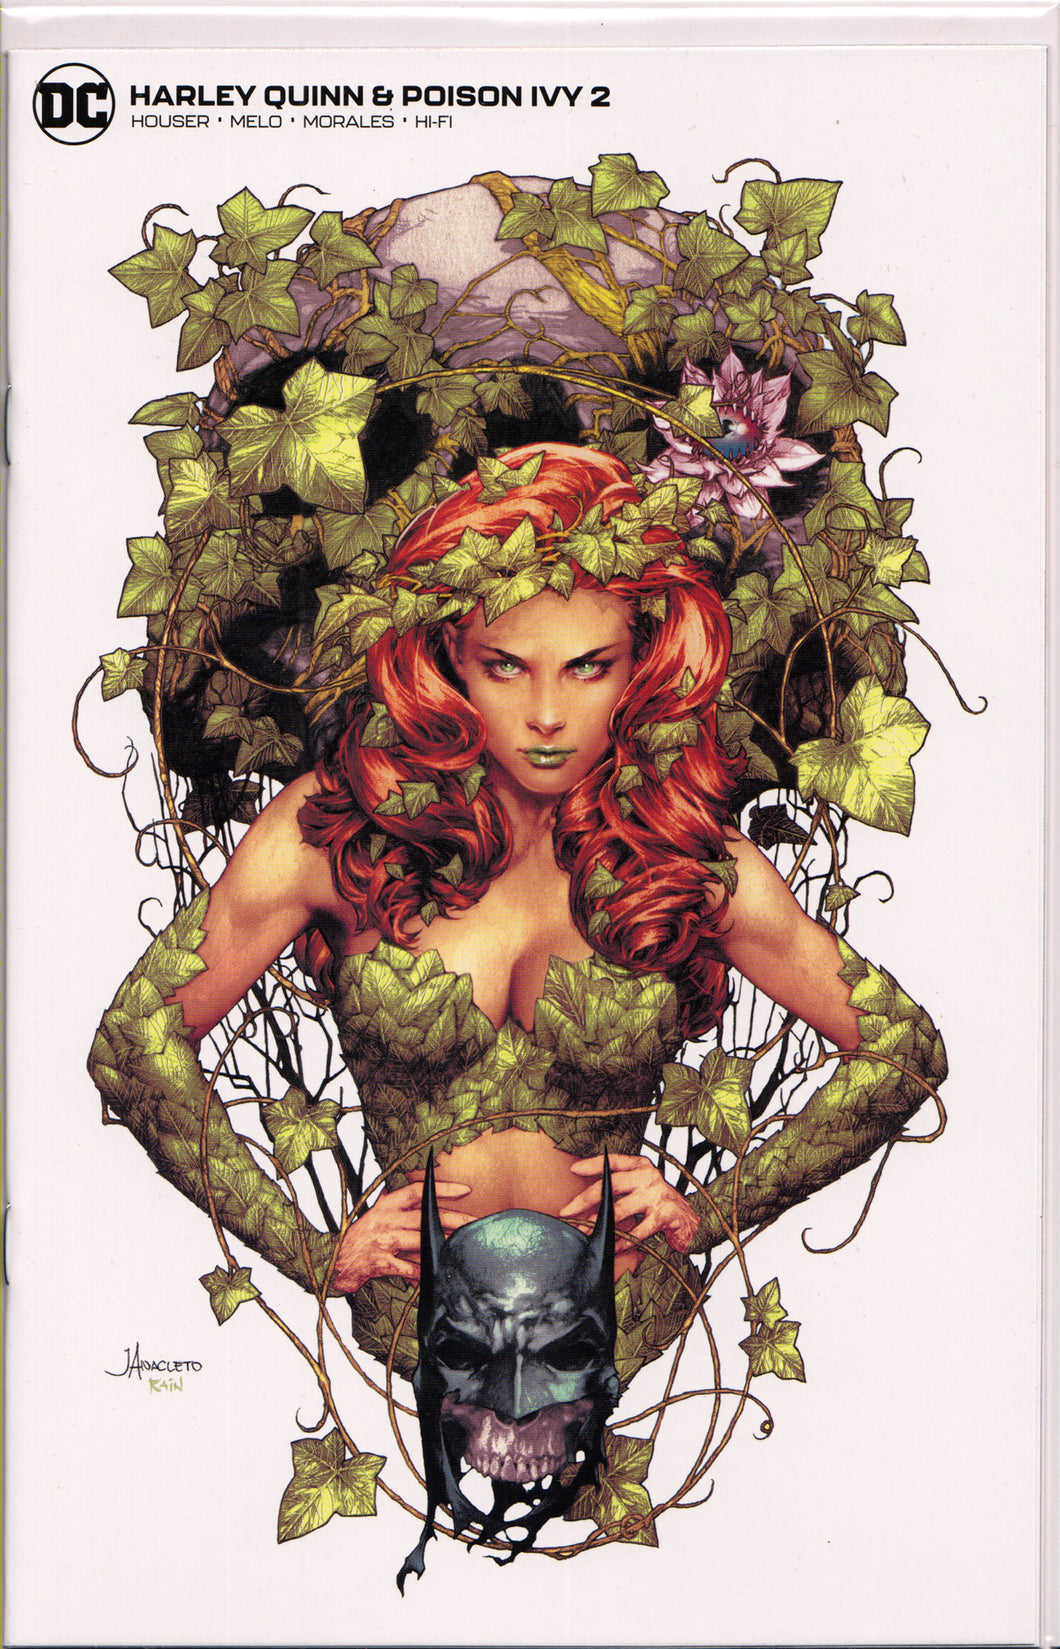 HARLEY QUINN & POISON IVY #2 (JAY ANACLETO POISON IVY MINIMUM TRADE DRESS EXCLUSIVE COVER) ~ DC Comics